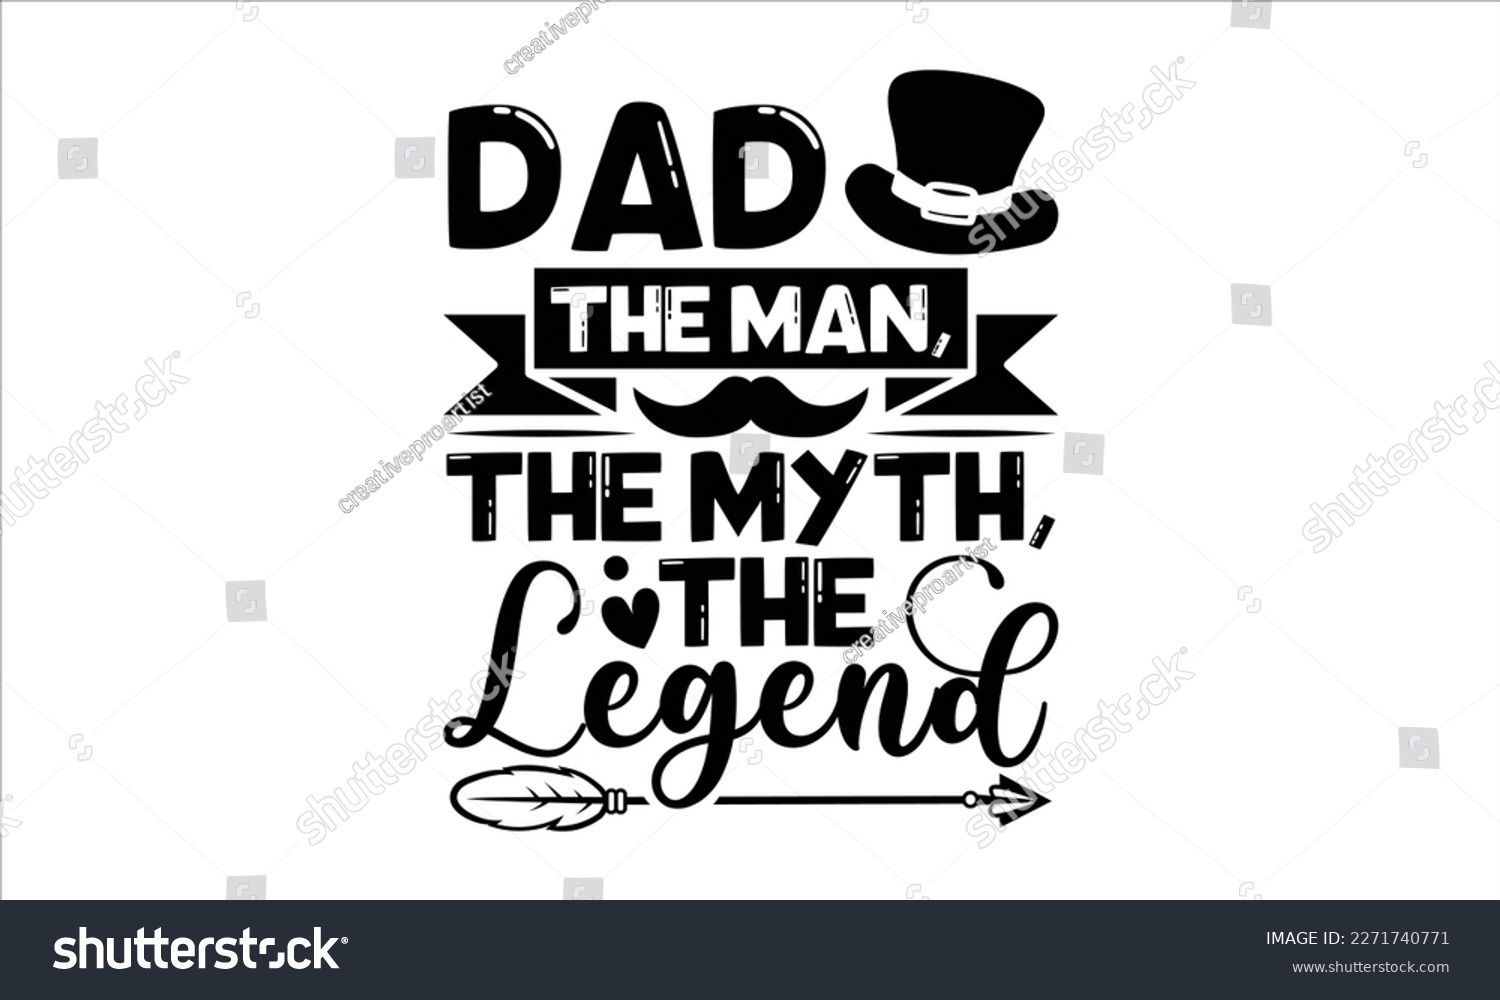 SVG of Dad the man, the myth, the legend- Father's Day svg design, Hand drawn lettering phrase isolated on white background, Illustration for prints on t-shirts and bags, posters, cards eps 10. svg